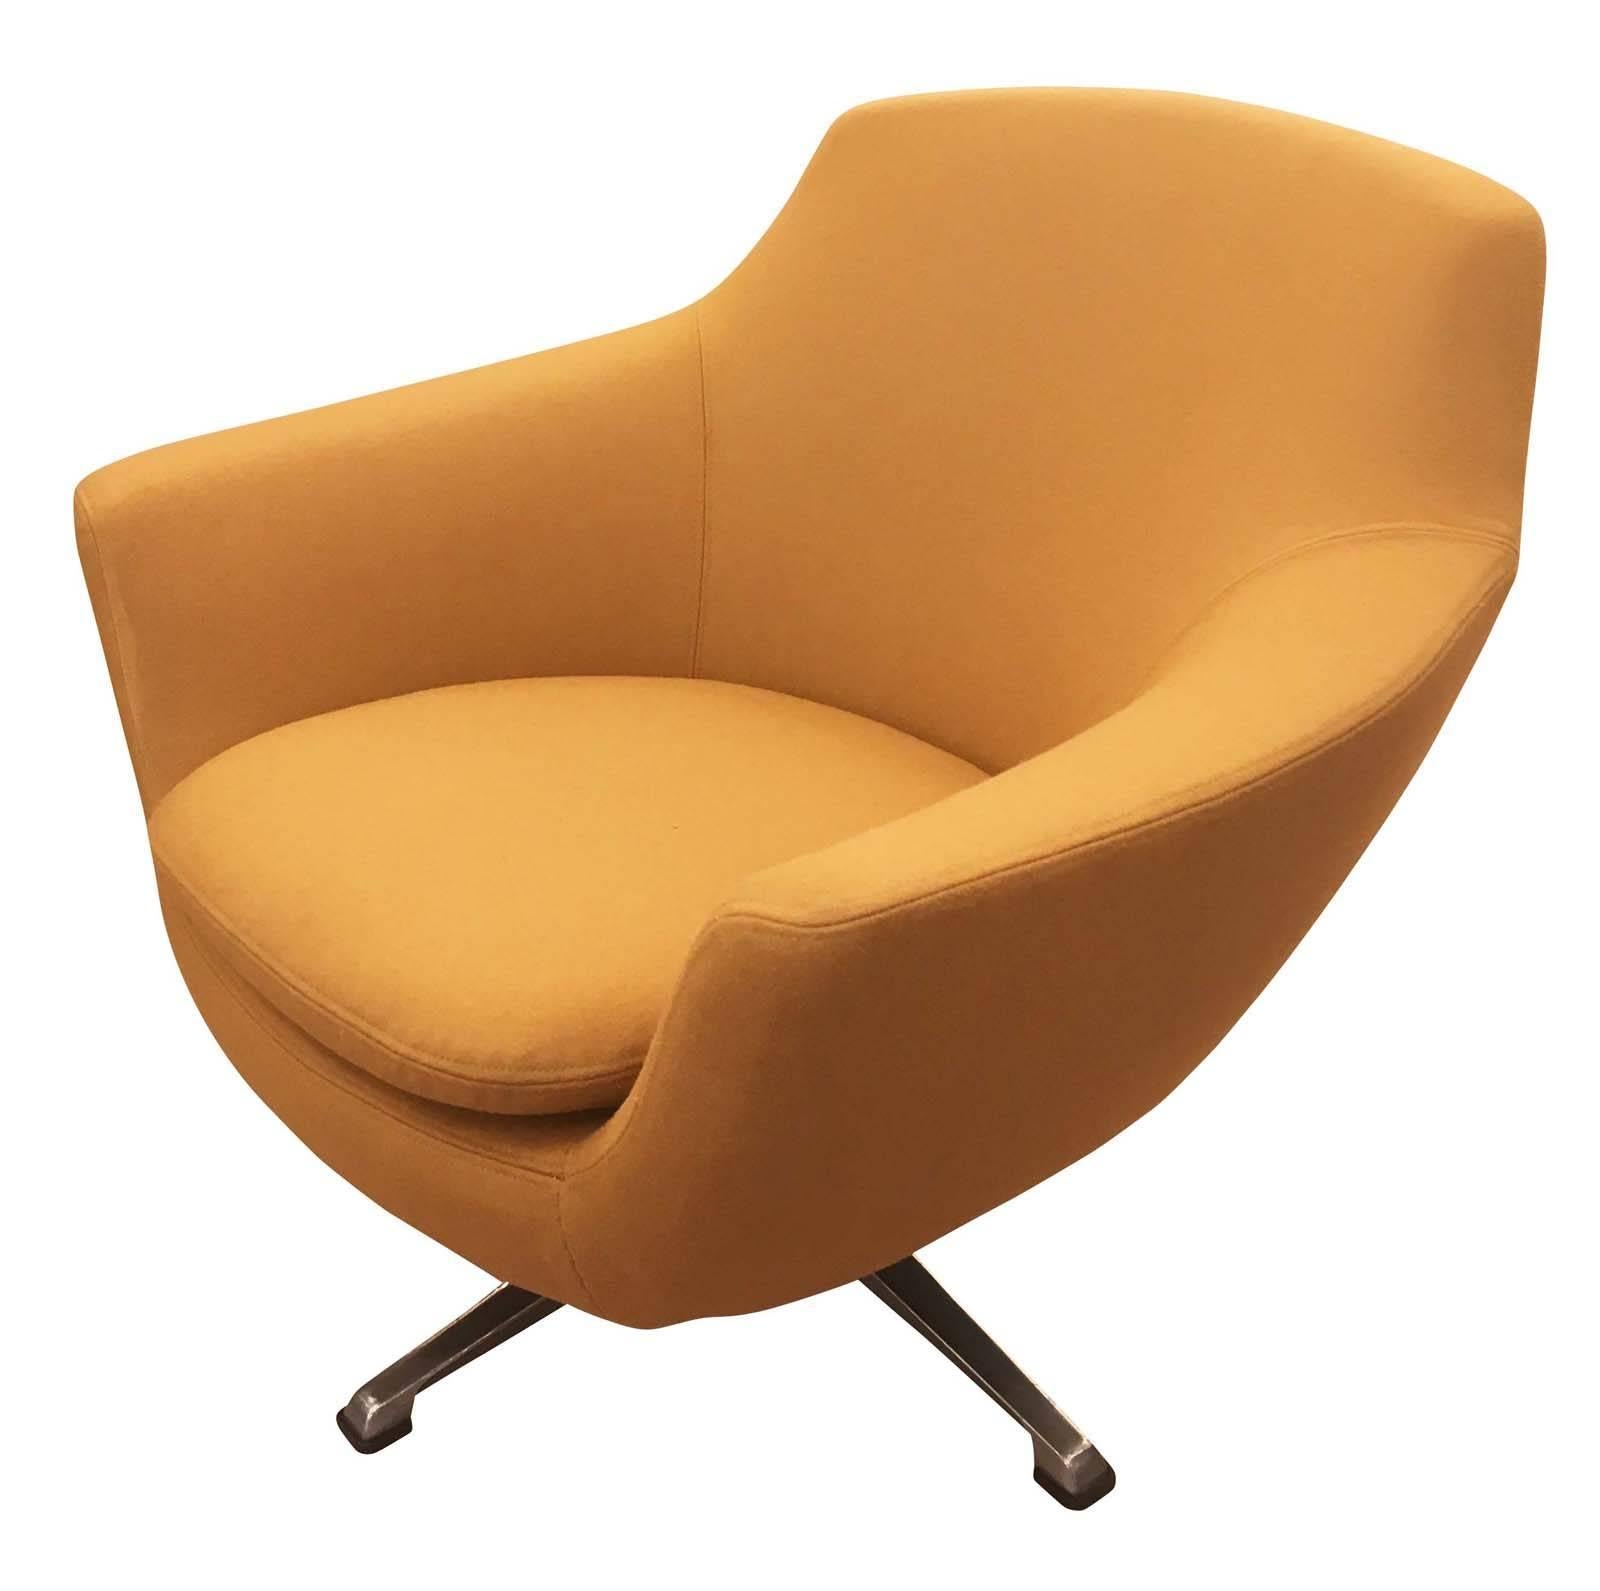 Very comfortable Italian Mid-Century swivel chair with a polished metal base. It has been upholstered in a mustard colored wool fabric.